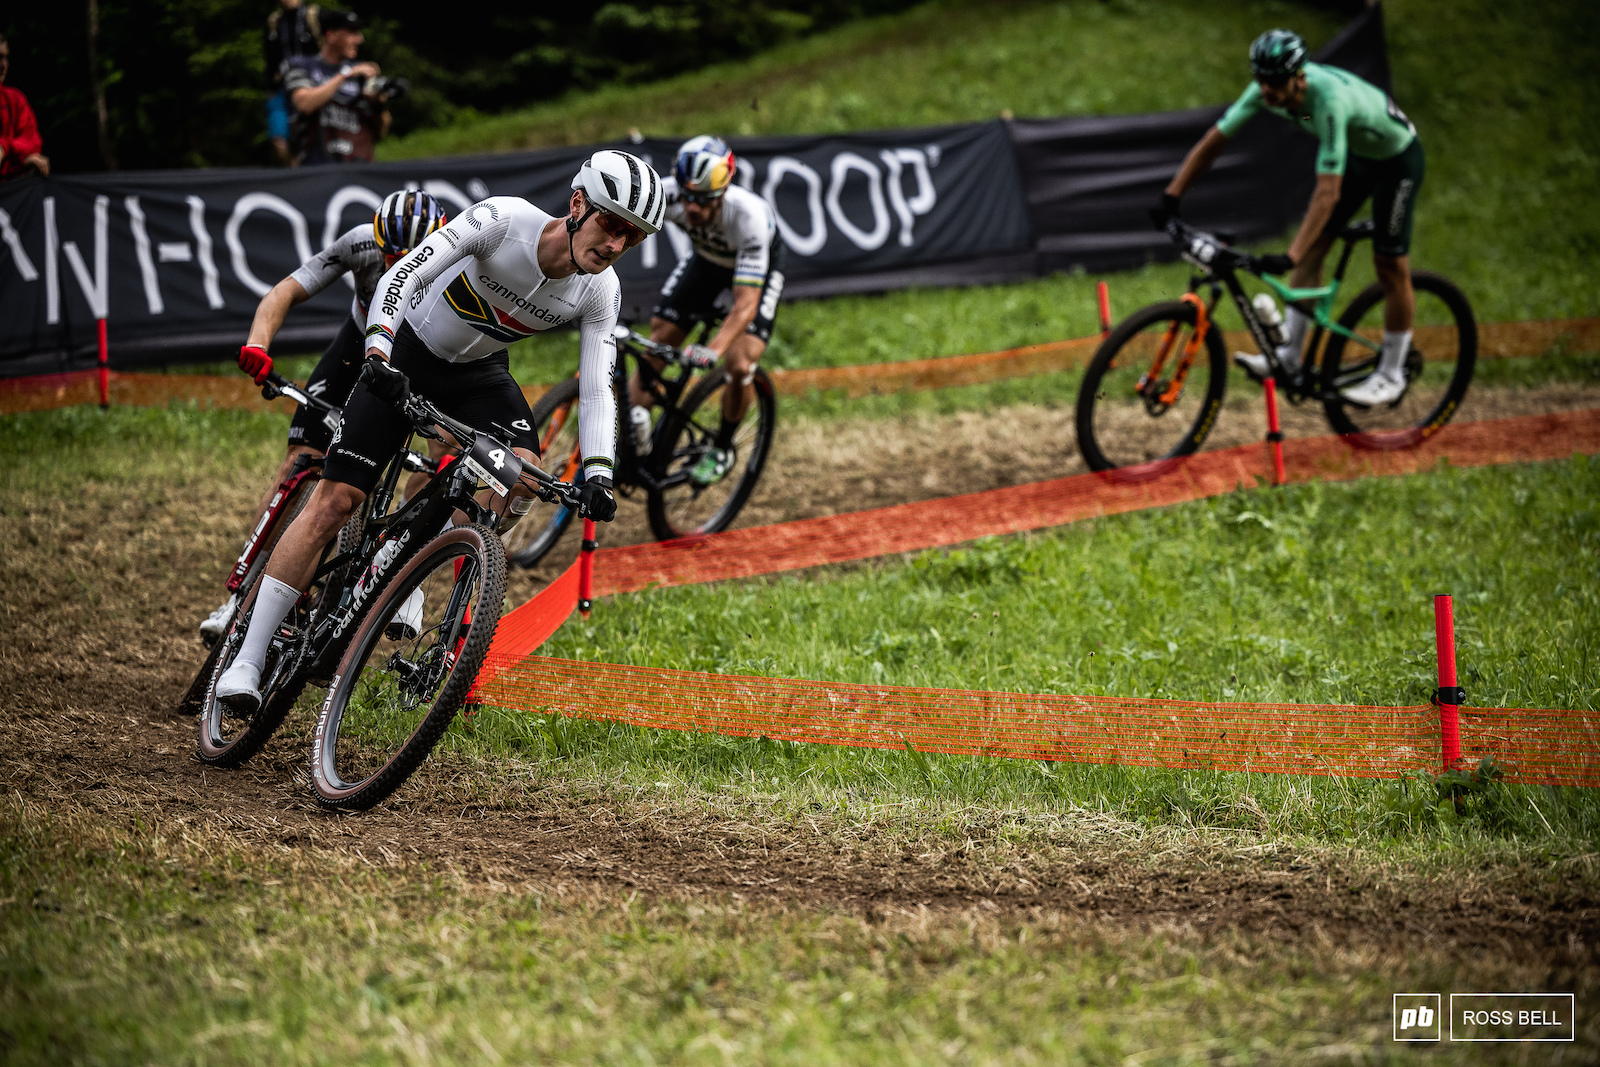 Alan Hatherly will be hoping to go one better on Sunday than he did in Lenzerheide last week.